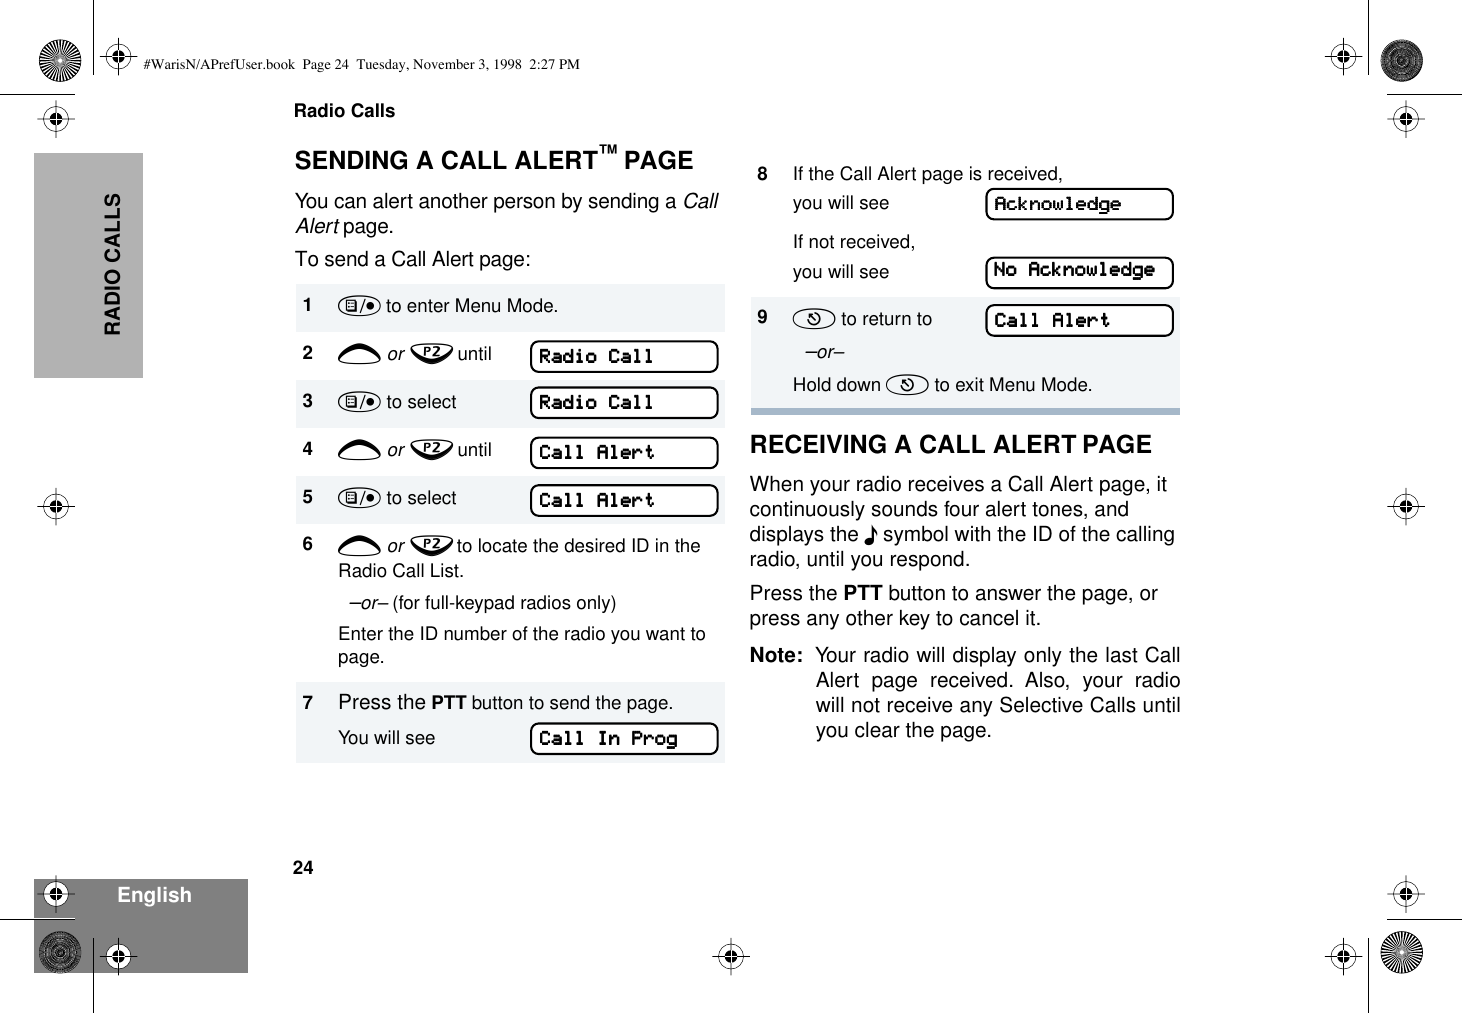 Radio Calls24EnglishRADIO CALLSSENDING A CALL ALERT™ PAGEYou can alert another person by sending a Call Alert page.To send a Call Alert page:RECEIVING A CALL ALERT PAGEWhen your radio receives a Call Alert page, it continuously sounds four alert tones, and displays the F symbol with the ID of the calling radio, until you respond.Press the PTT button to answer the page, or press any other key to cancel it.Note: Your radio will display only the last CallAlert page received. Also, your radiowill not receive any Selective Calls untilyou clear the page.1) to enter Menu Mode.2+ or ? until3) to select RADIO CALL4+ or ? until Call Alert5) to select Call Alert6+ or ? to locate the desired ID in the Radio Call List.  –or– (for full-keypad radios only) Enter the ID number of the radio you want to page.7Press the PTT button to send the page.You will see                       Call In Prog8If the Call Alert page is received, you will seeIf not received,you will see9( to return to          Call Alert  –or–Hold down ( to exit Menu Mode.RRRRaaaaddddiiiioooo    CCCCaaaallllllllRRRRaaaaddddiiiioooo    CCCCaaaallllllllCCCCaaaallllllll    AAAAlllleeeerrrrttttCCCCaaaallllllll    AAAAlllleeeerrrrttttCCCCaaaallllllll    IIIInnnn    PPPPrrrrooooggggCCCCaaaallllllll    AAAAlllleeeerrrrttttAAAAcccckkkknnnnoooowwwwlllleeeeddddggggeeeeNNNNoooo    AAAAcccckkkknnnnoooowwwwlllleeeeddddggggeeee#WarisN/APrefUser.book  Page 24  Tuesday, November 3, 1998  2:27 PM